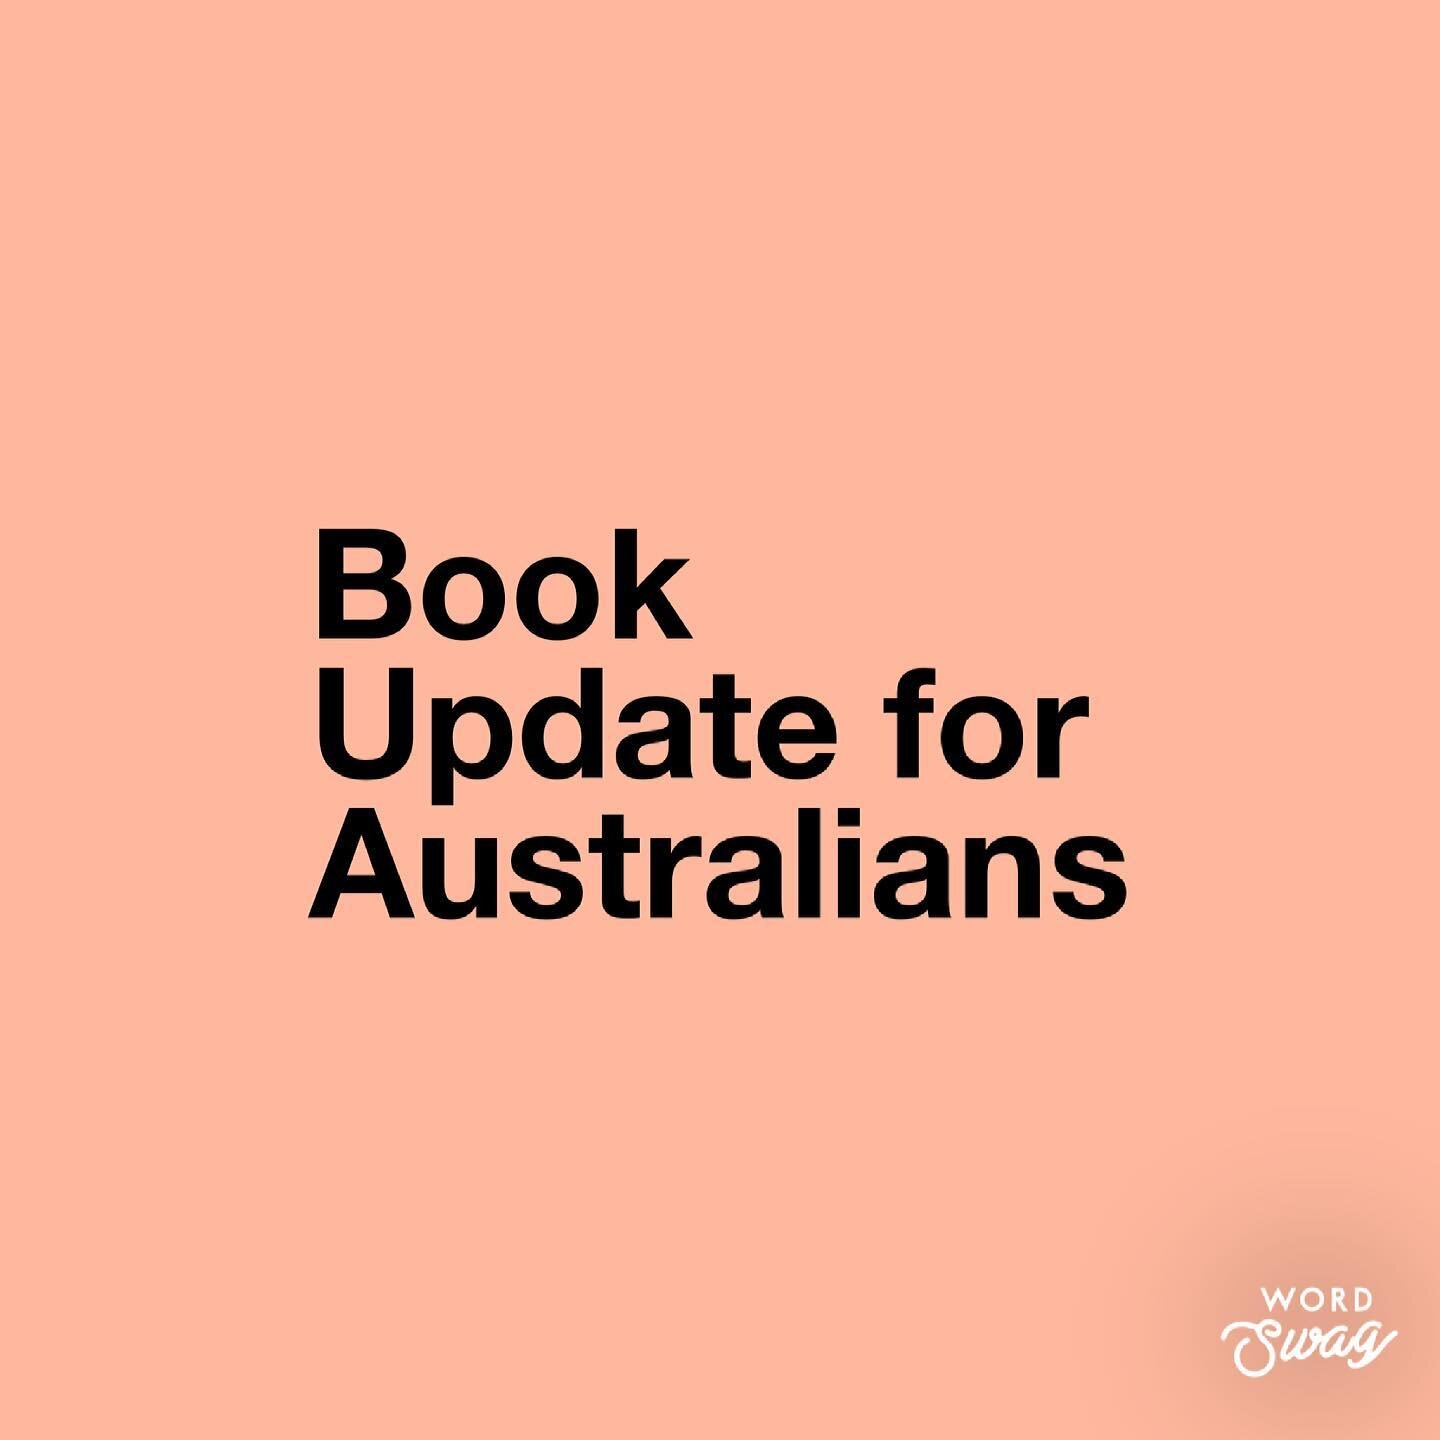 Many of you have reached out asking when my book can be purchased in Australia. You will see it is available on Amazon.com.au through 3rd party sellers at pricing that is set by them. I will be sure to keep you updated when Amazon releases the versio